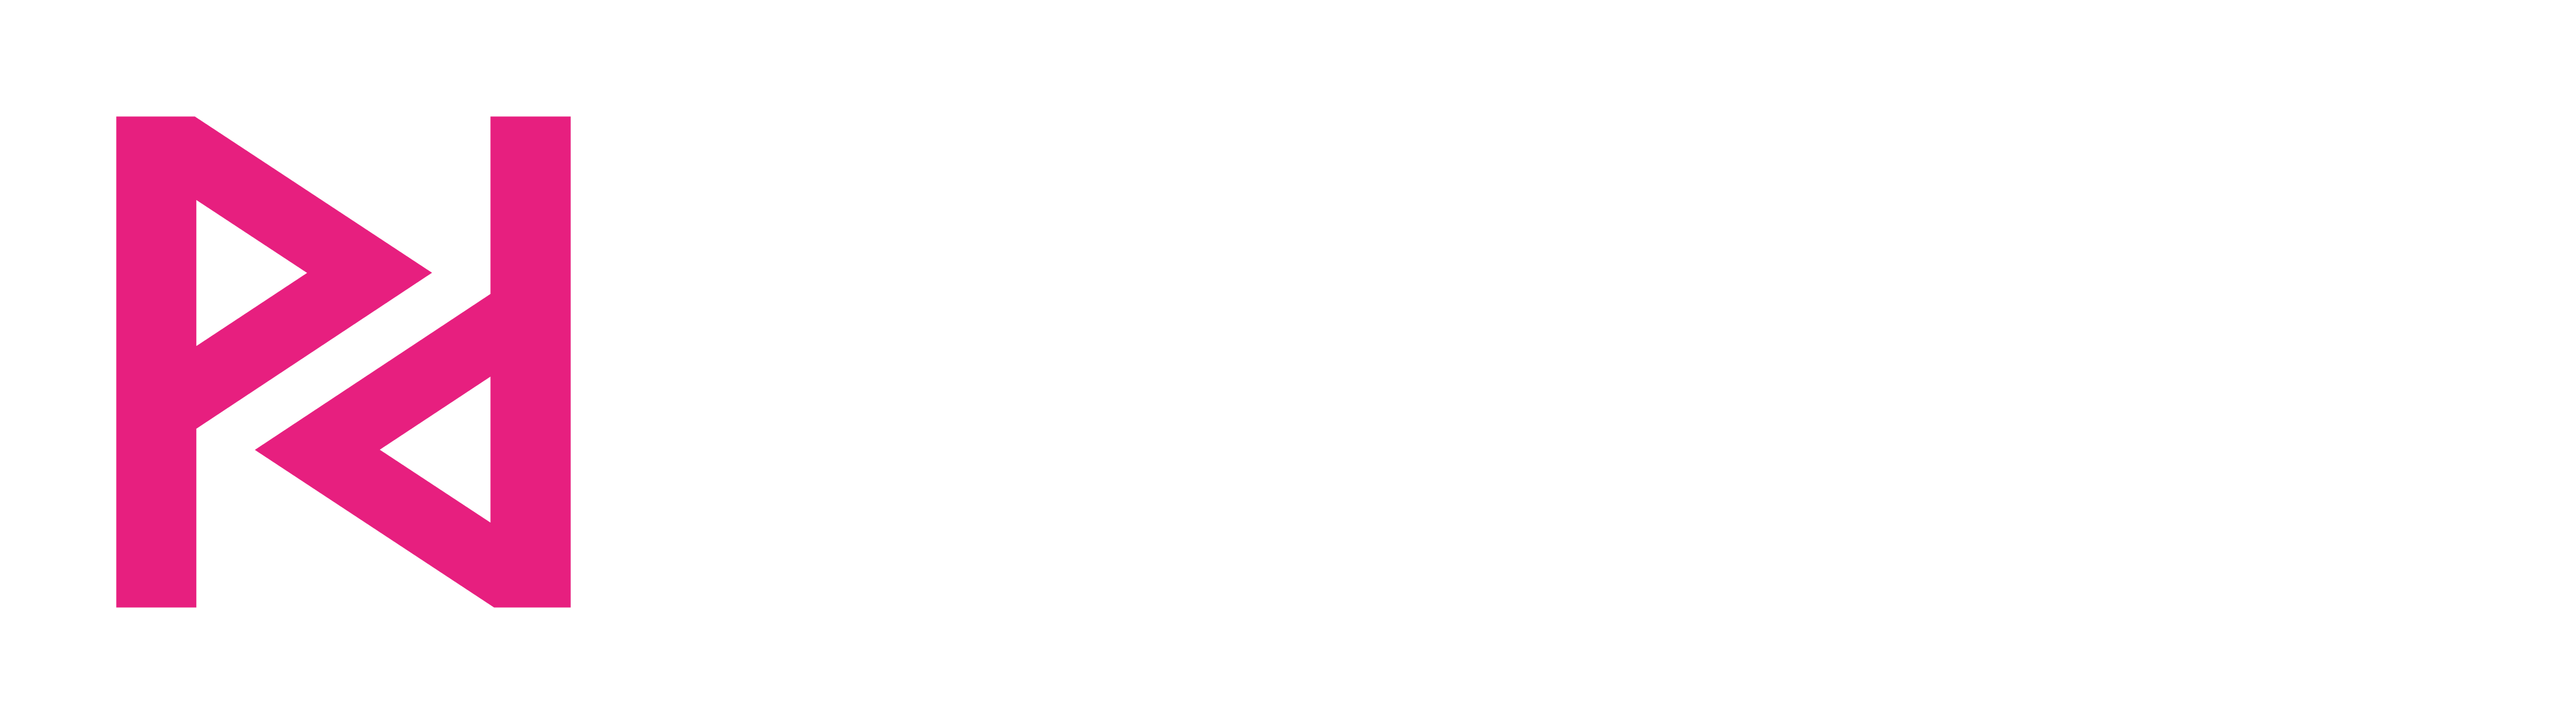 Pink Production Services Logo